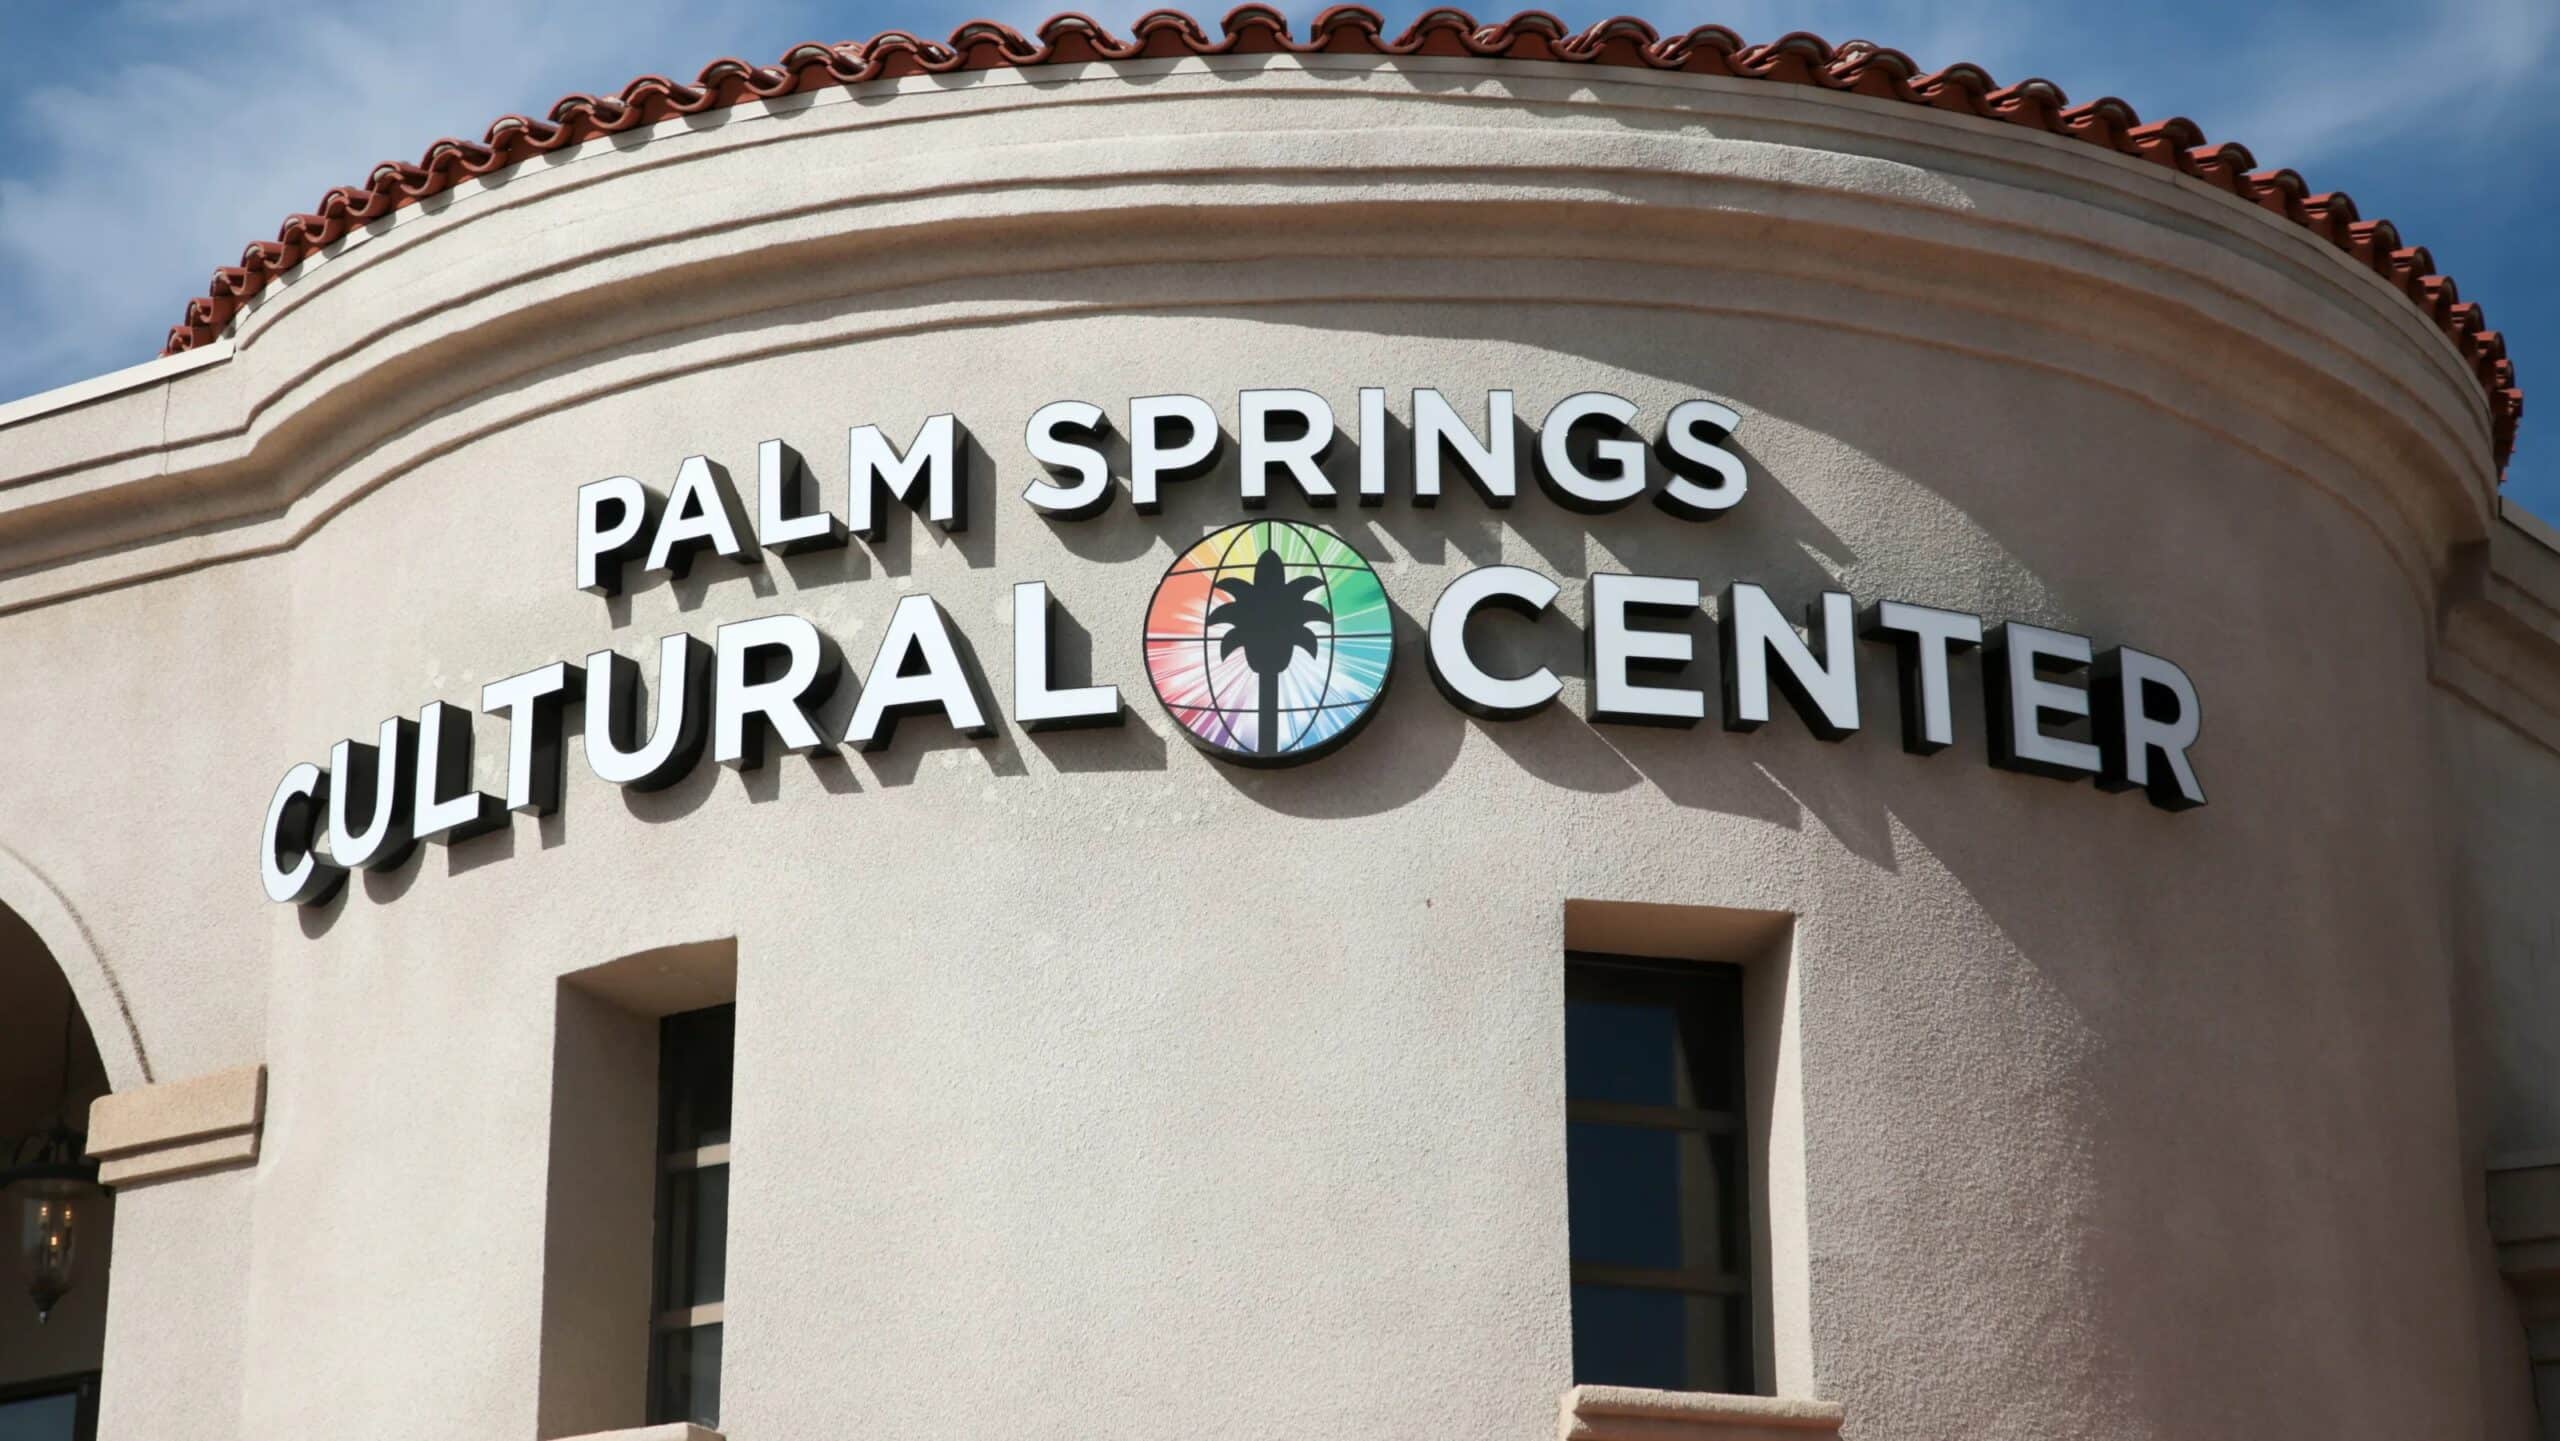 Palm Springs Cultural Center sign